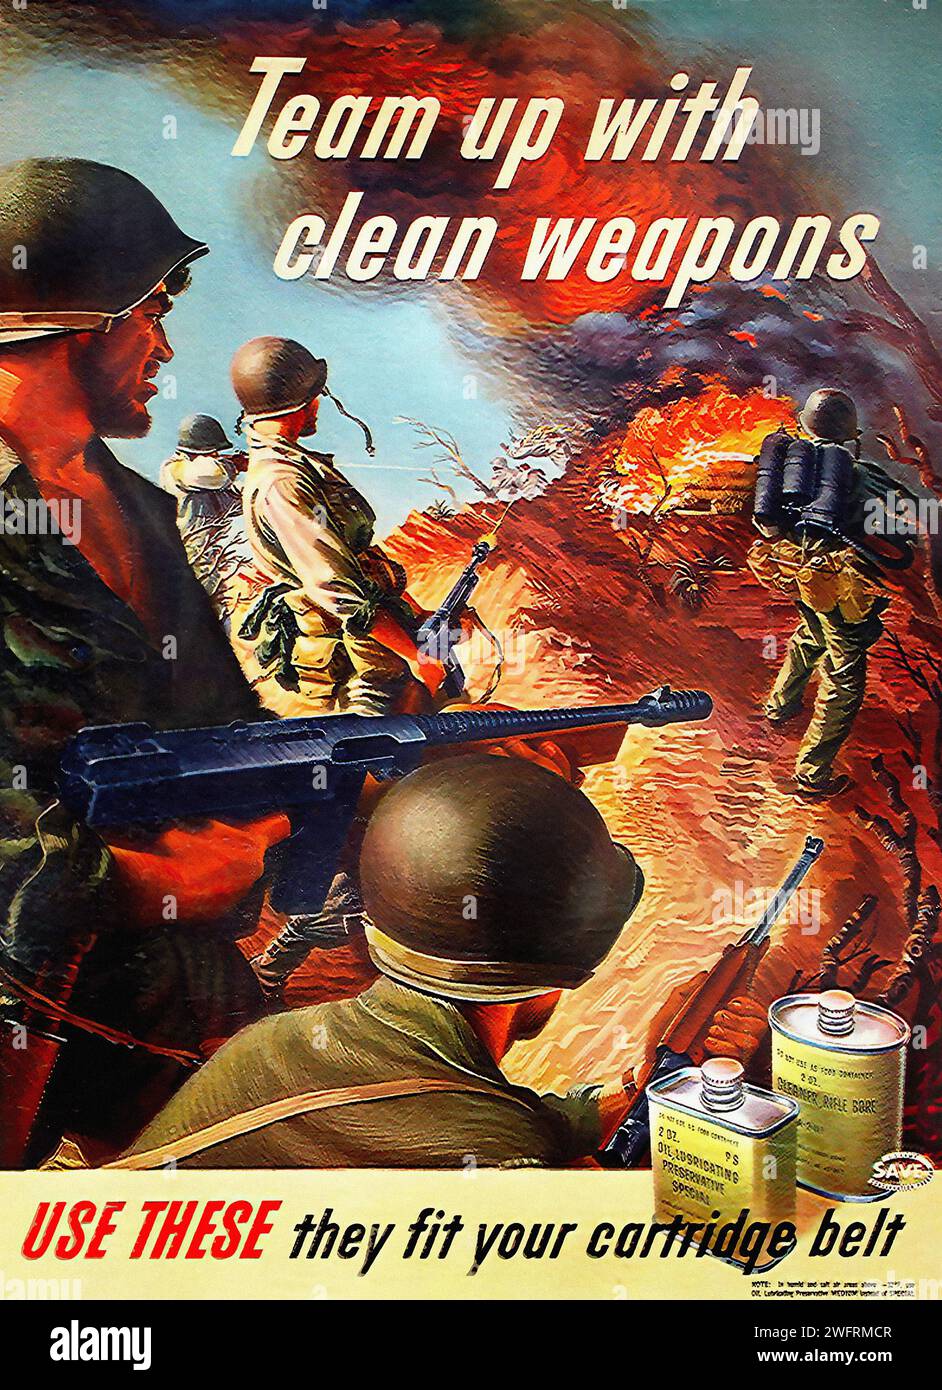 “TEAM UP WITH CLEAN WEAPONS” “USE THESE THEY FIT YOUR CARTRIDGE BELT!”  This is a vintage advertisement poster for cleaning weapons, originating from the United States during the World War II era. The poster features a red and orange background with a group of soldiers in the foreground. The soldiers are engaged in a battle scene, holding guns. The text on the poster promotes the use of certain cleaning products, which are depicted on the poster, for maintaining weapons. The graphic style of the poster is typical of mid-20th century American print media, with its bold colors and dramatic image Stock Photo